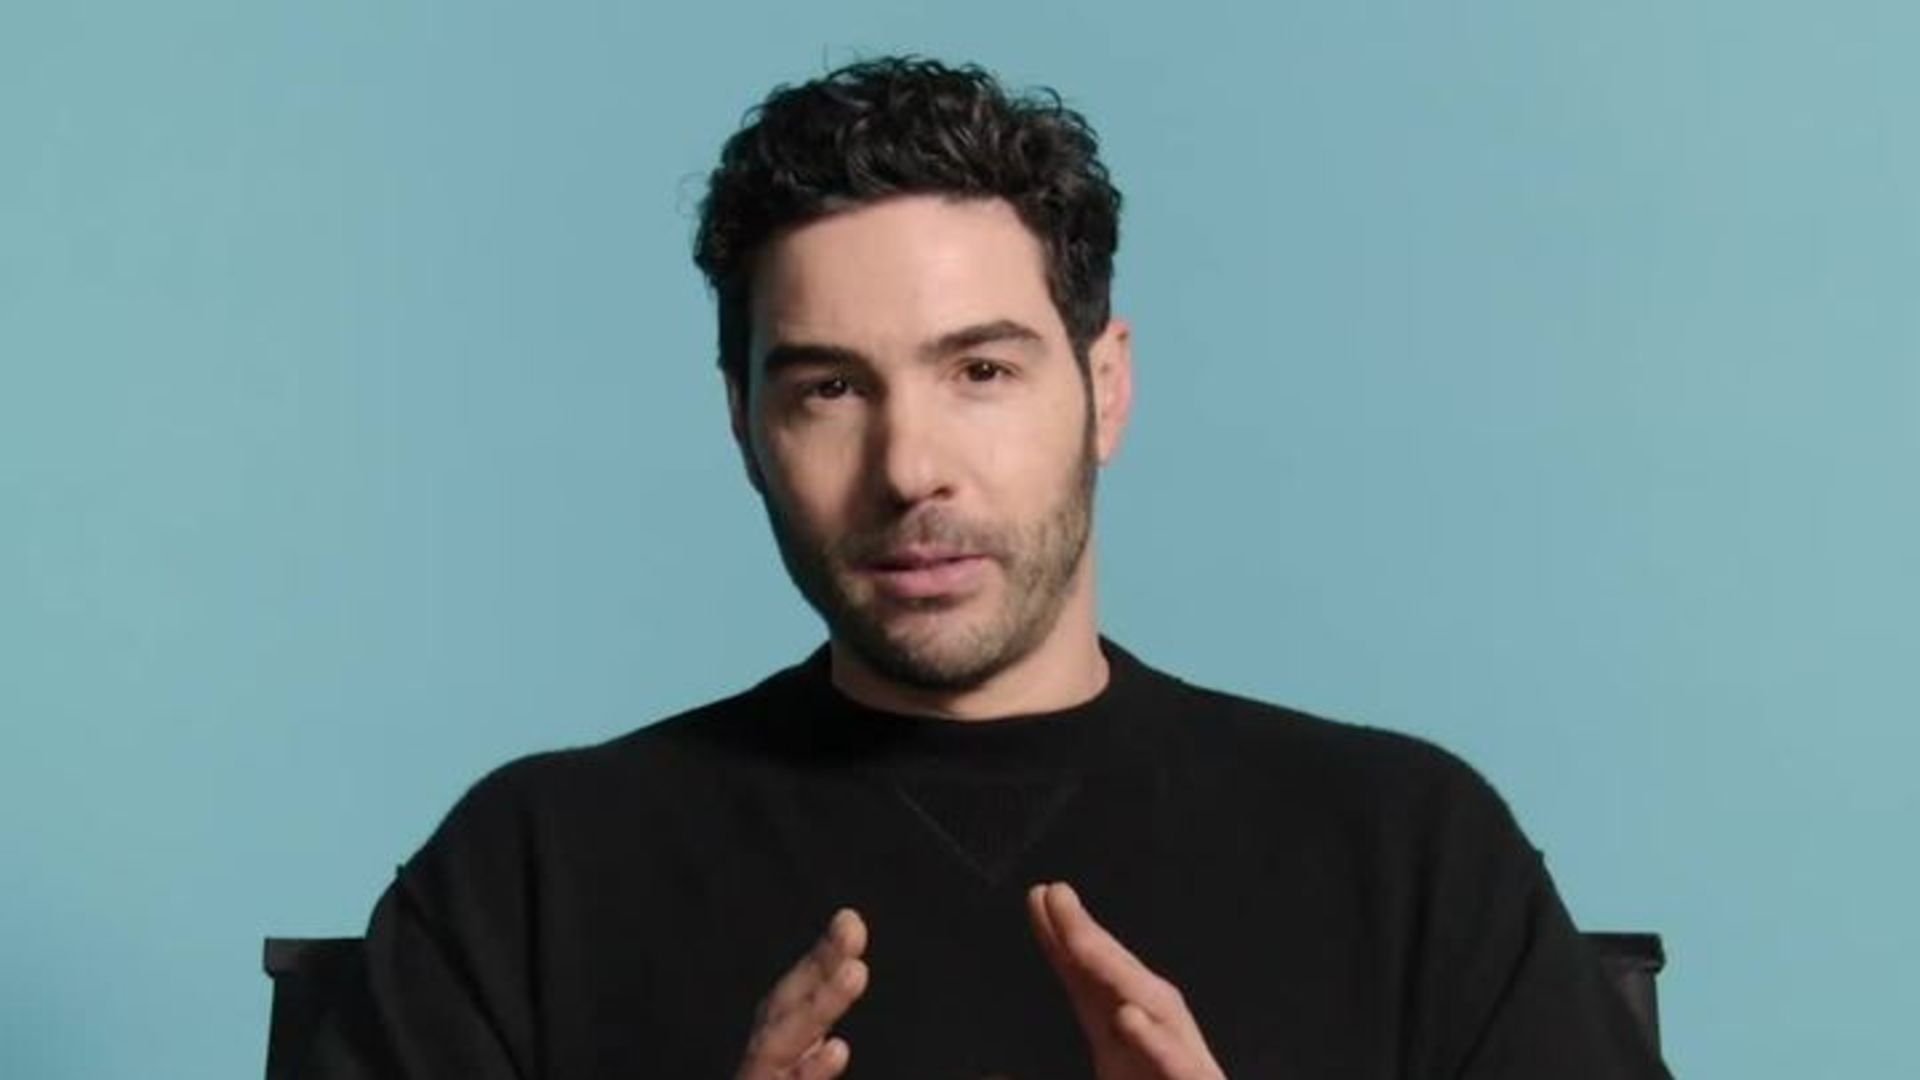 Tahar Rahim is the first person to wear Louis Vuitton's new watch